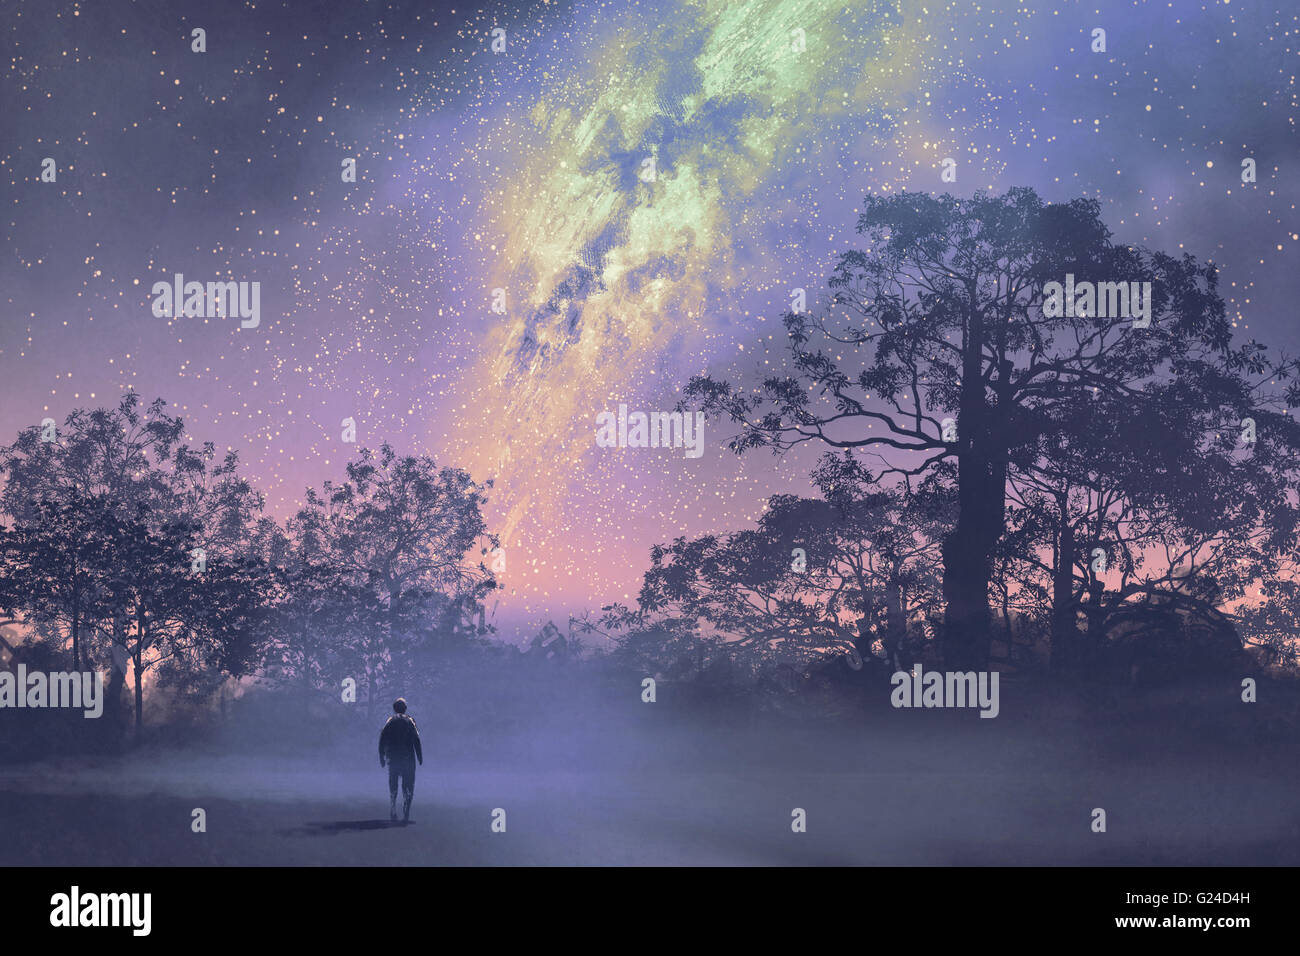 man standing against the milky way above silhouetted trees,night sky,scenery illustration Stock Photo